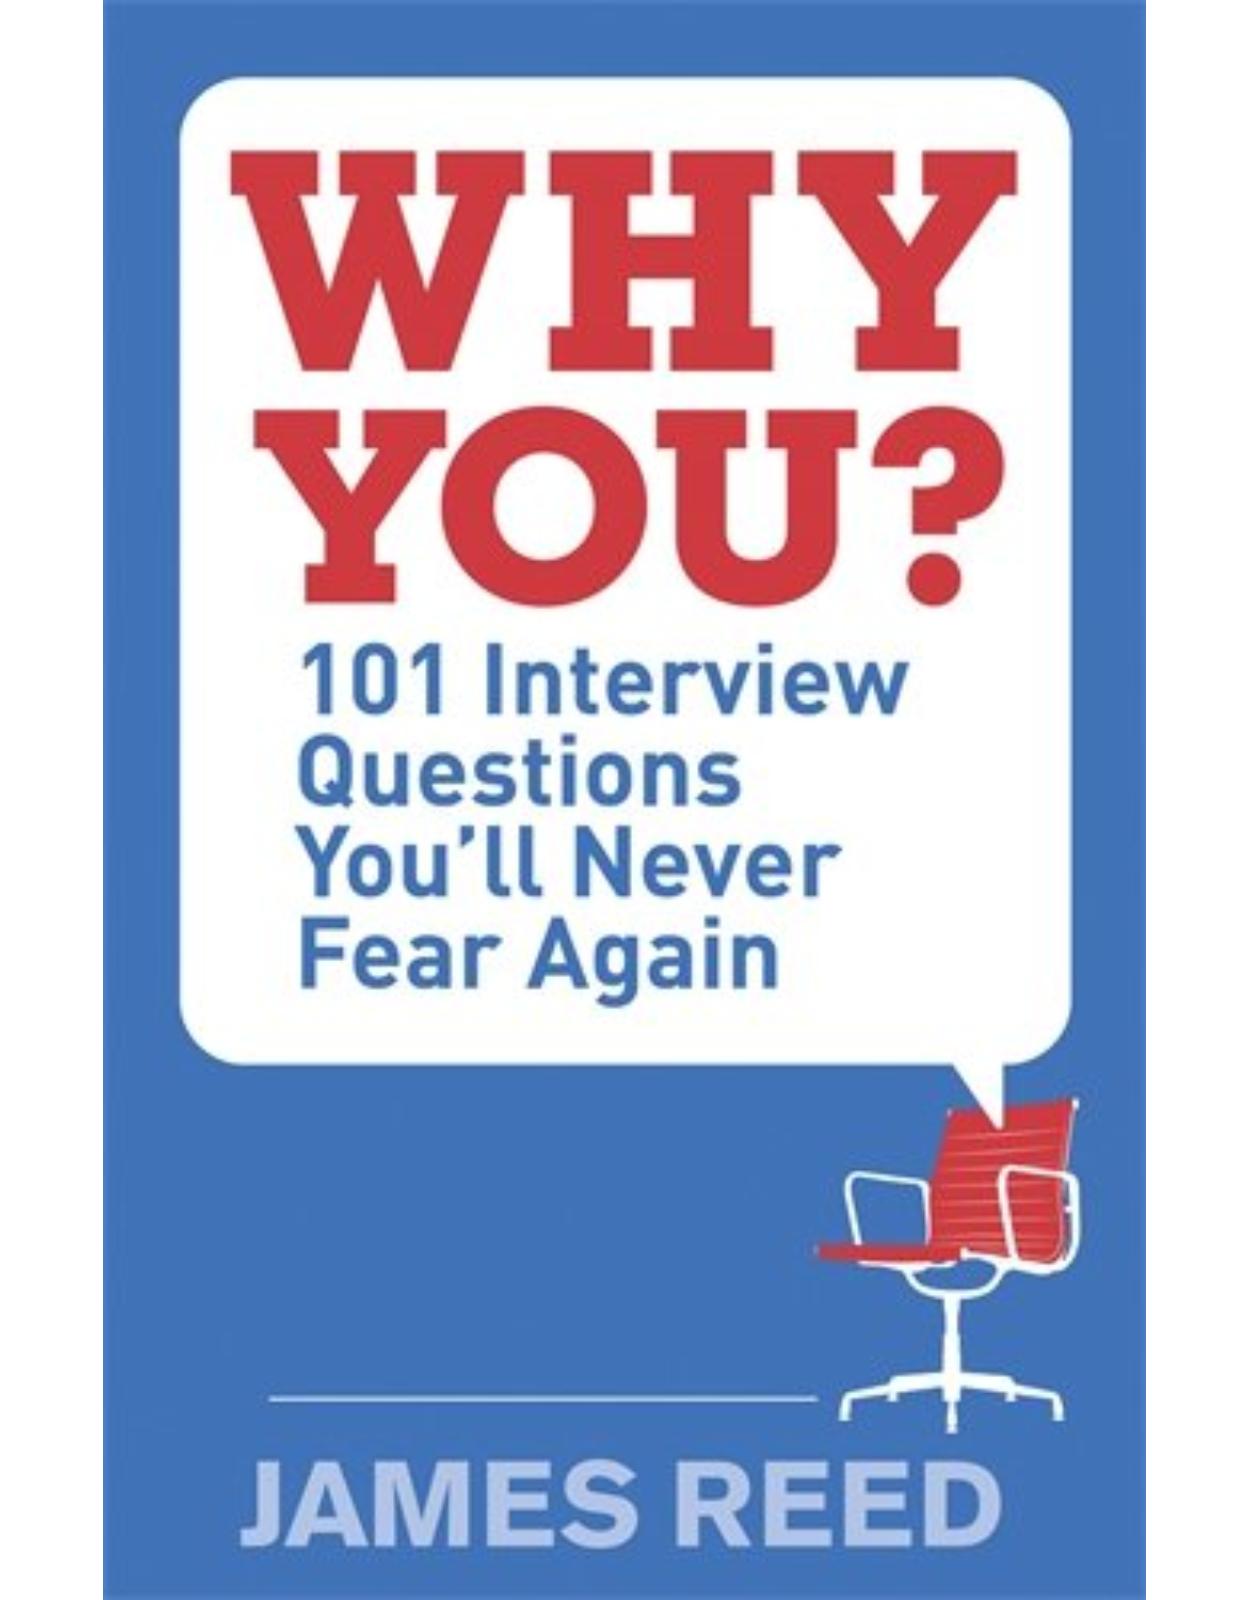 Why You?: 101 Interview Questions You'll Never Fear Again